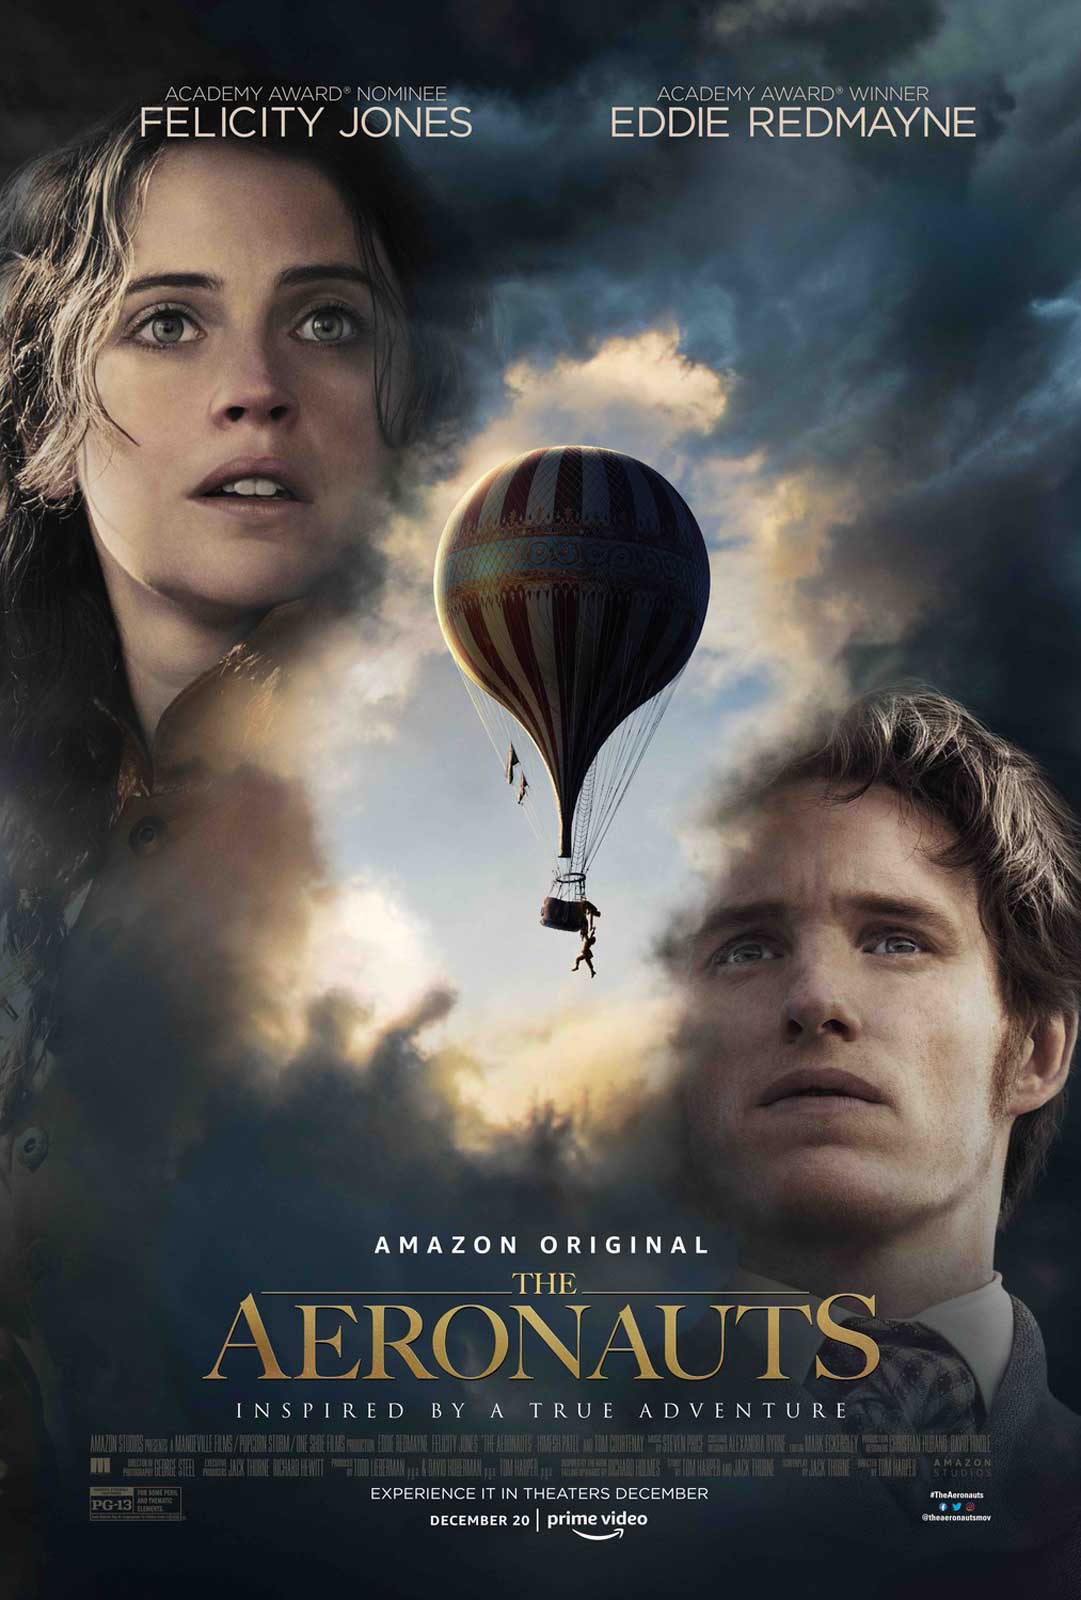 Pilot Amelia Wren (Felicity Jones) and scientist James Glaisher (Eddie Redmayne) find themselves in an epic fight for survival while attempting to make discoveries in a hot air balloon.